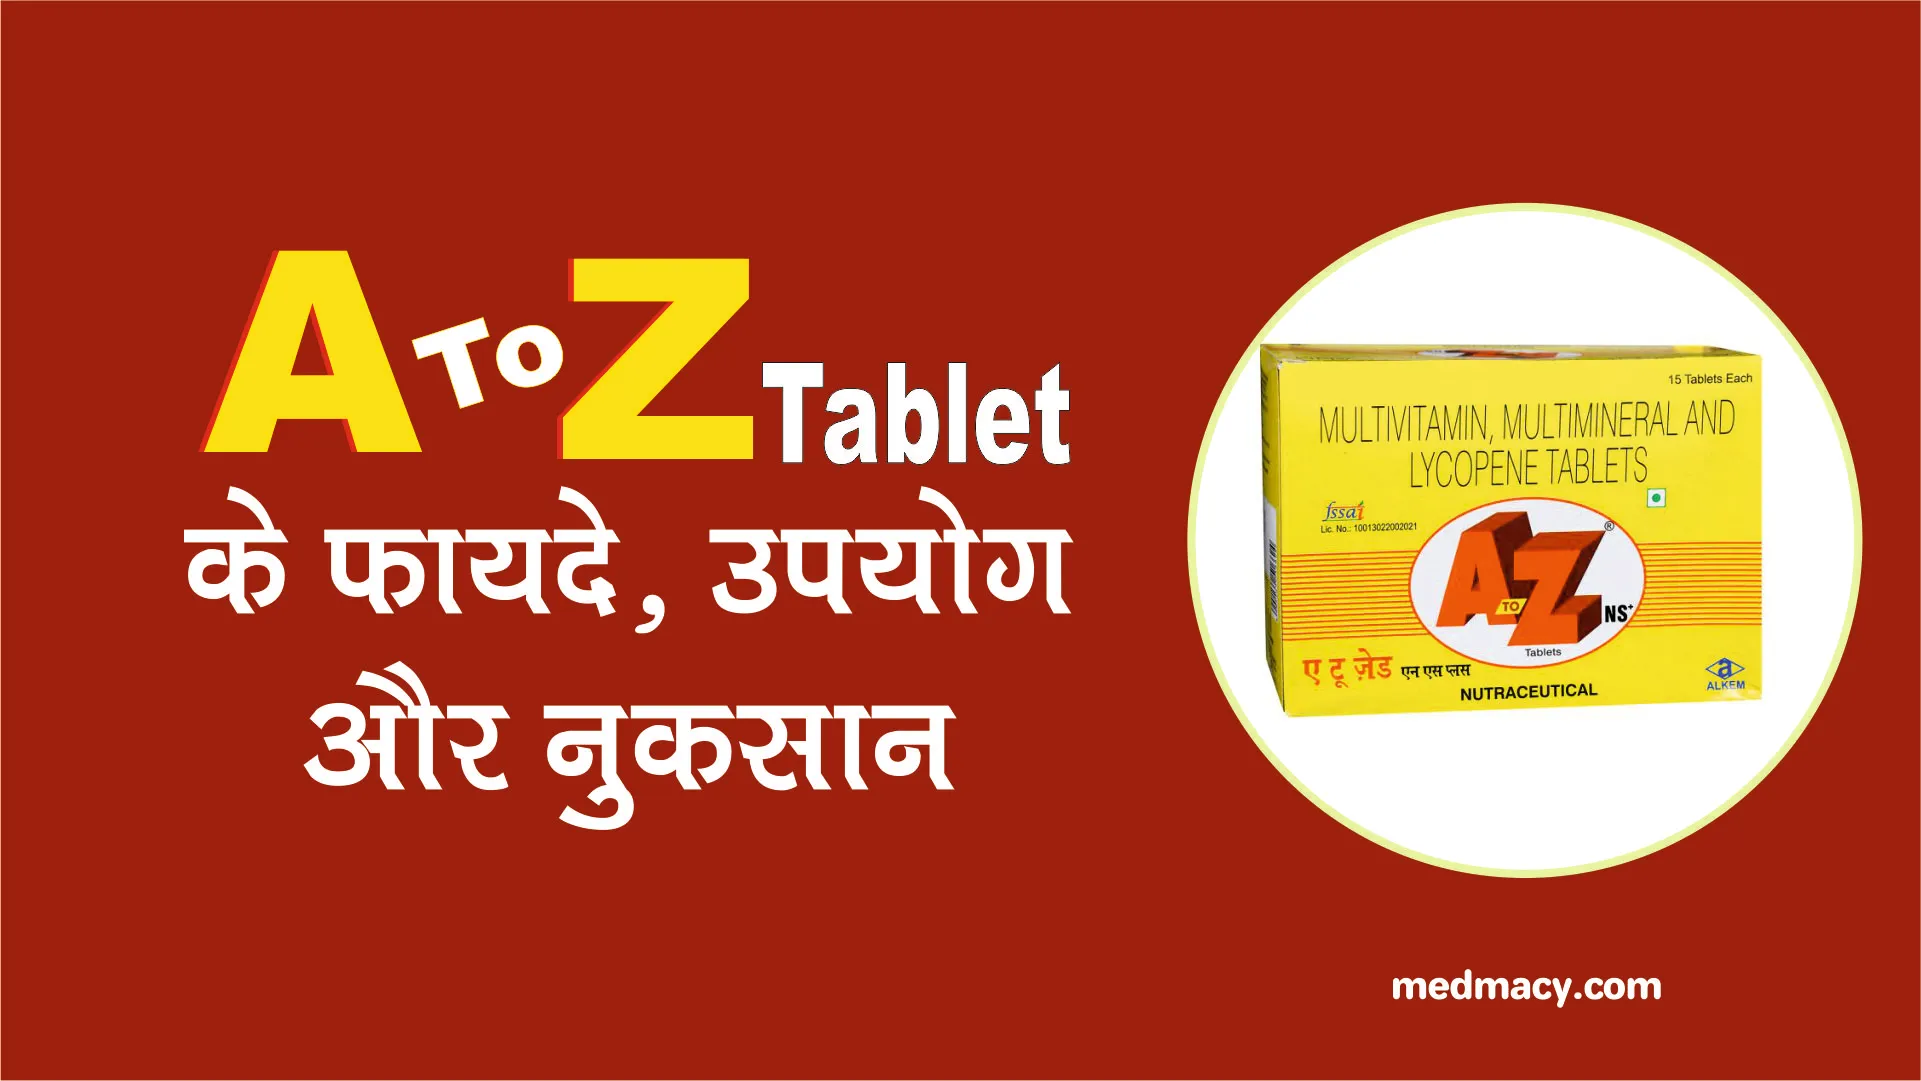 A To Z Tablet Uses in Hindi